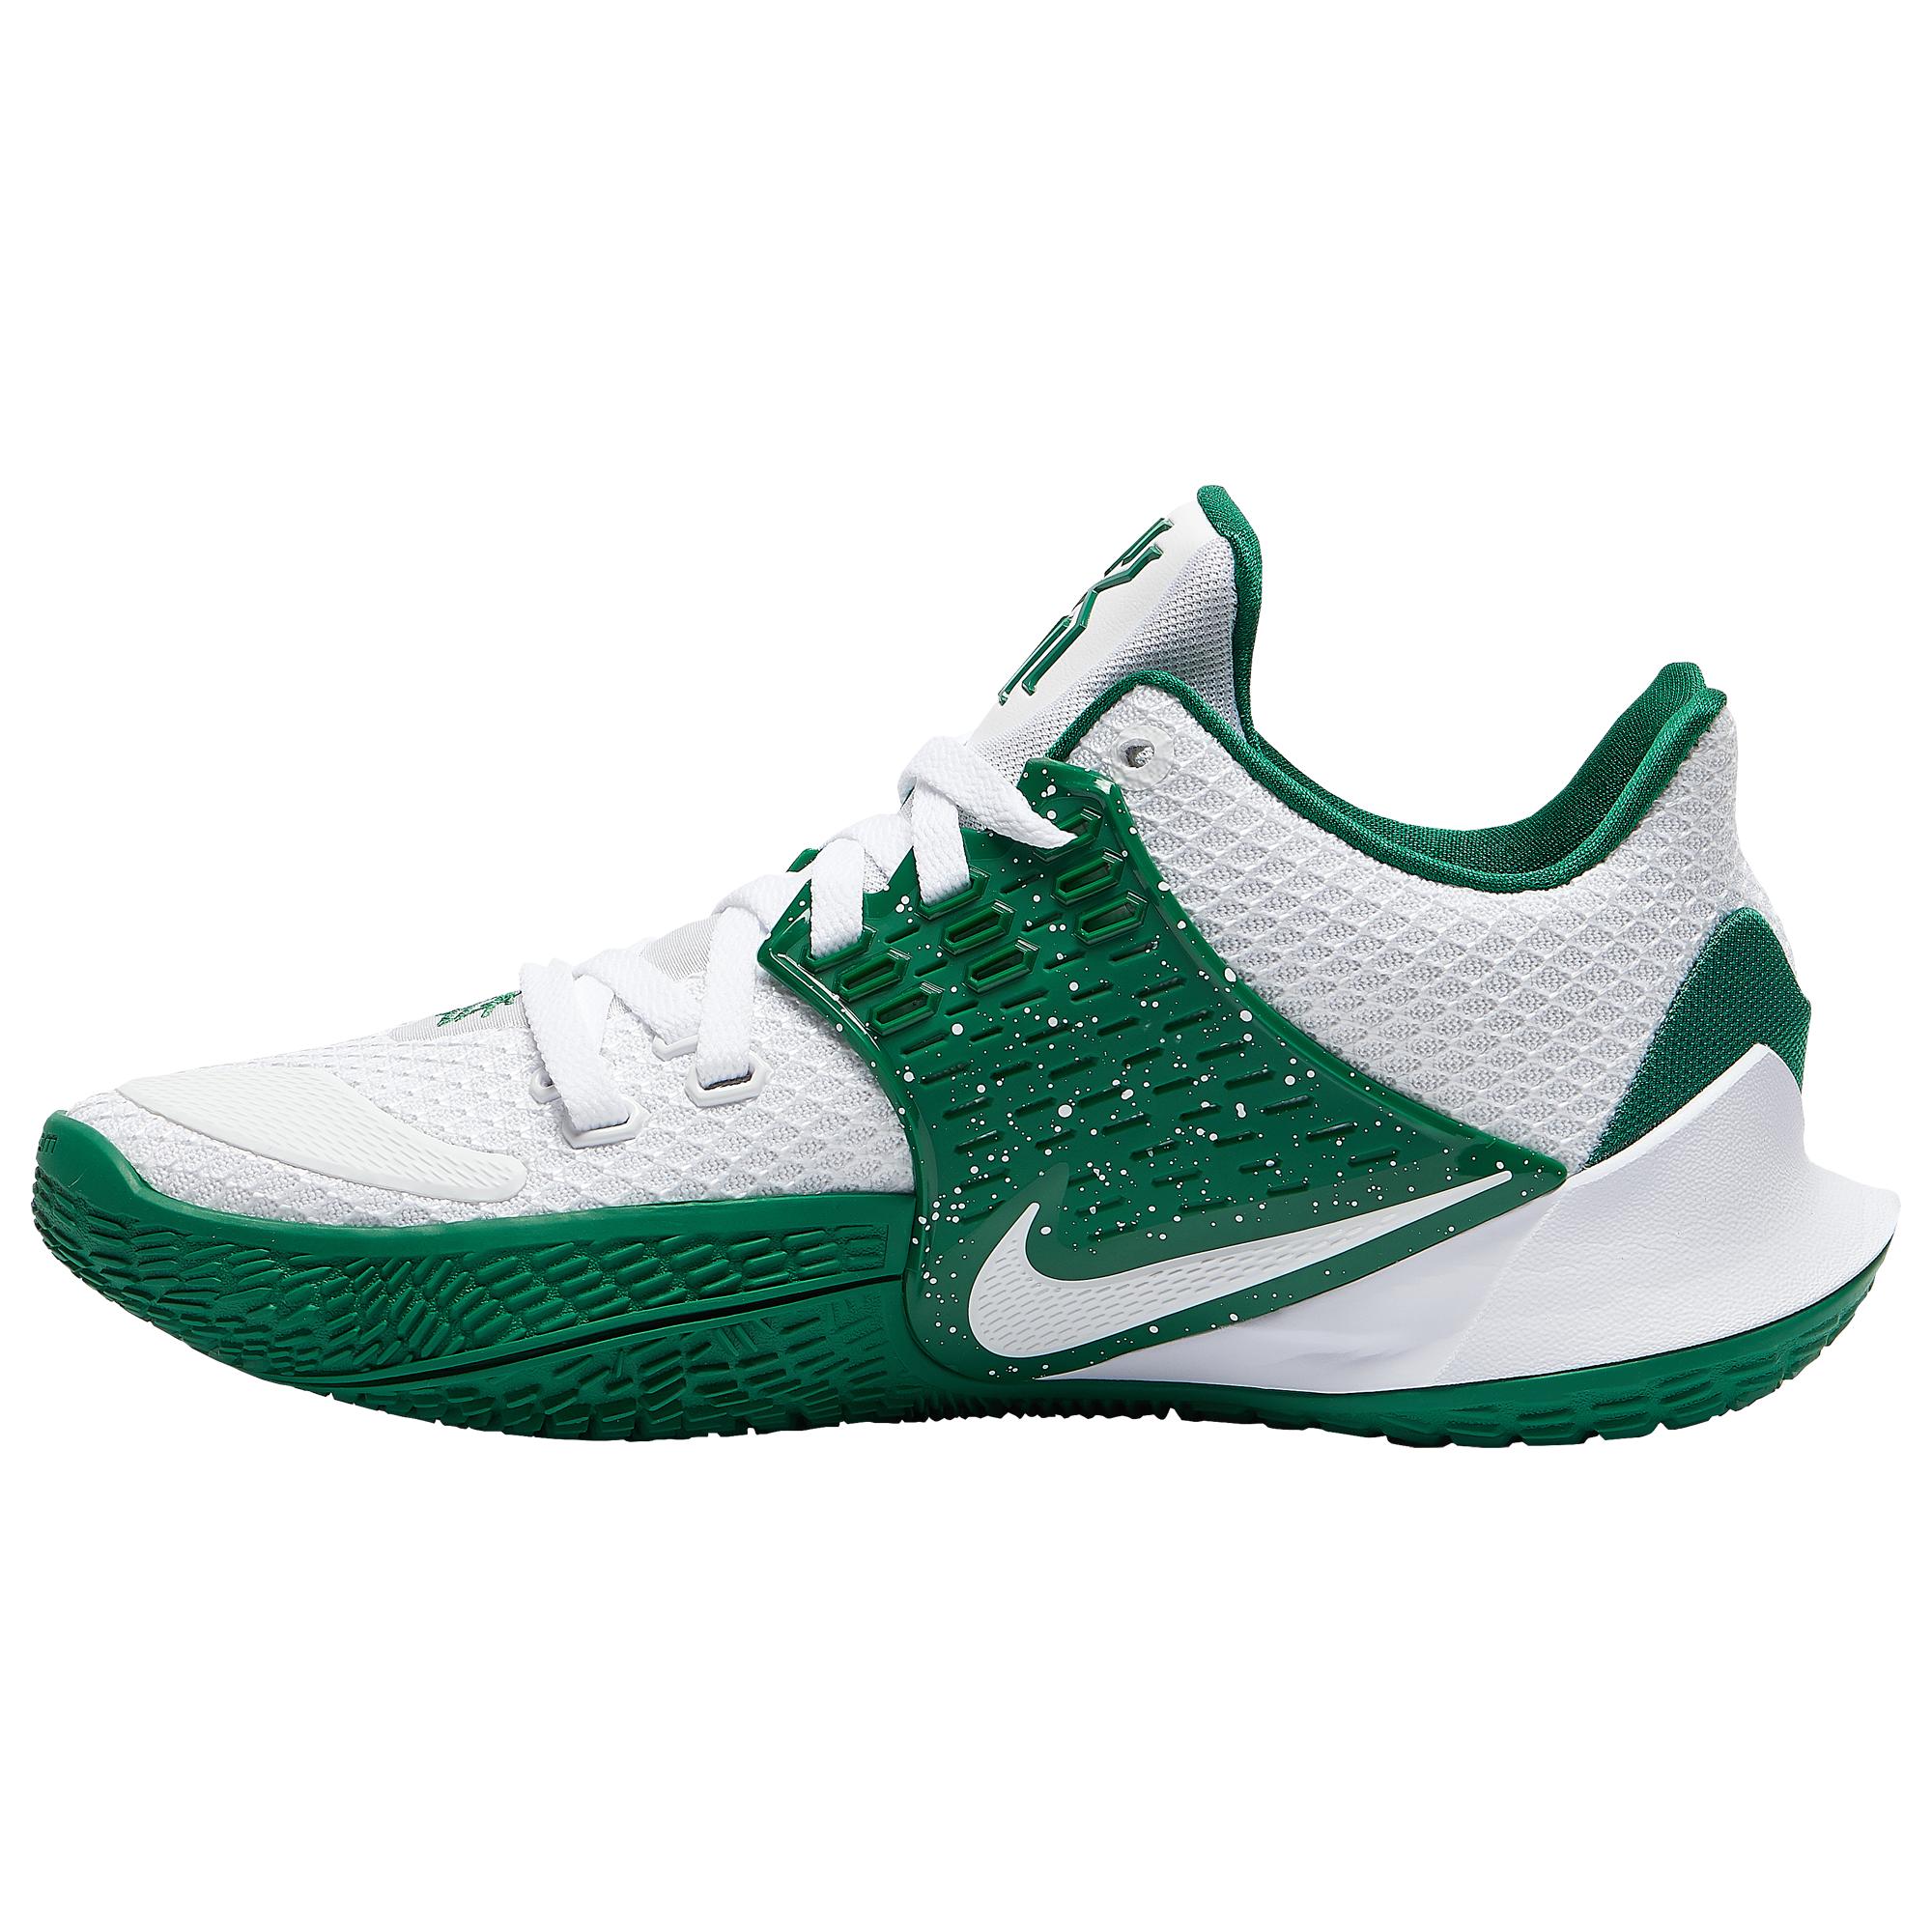 kyrie low green